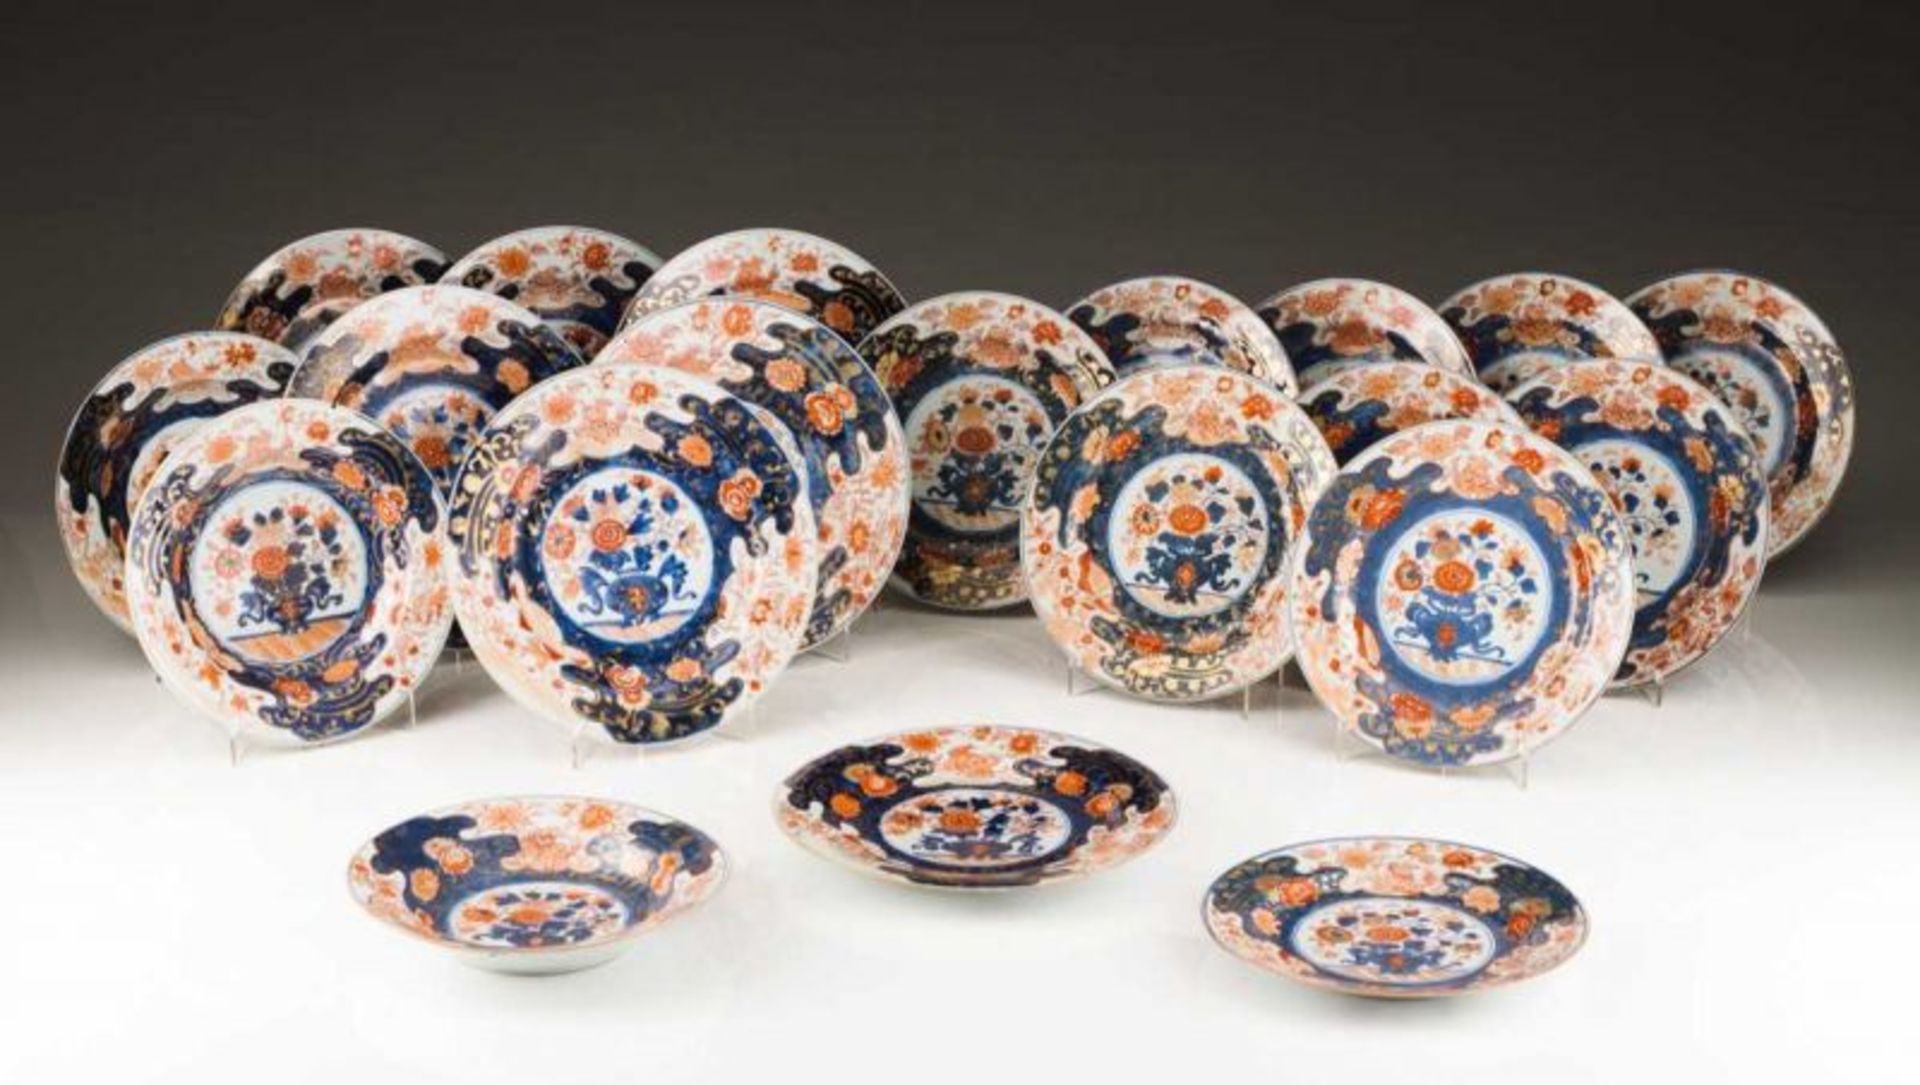 Part of a table service Chinese export porcelain Imari decoration in blue, rouge-de-fer and gilt